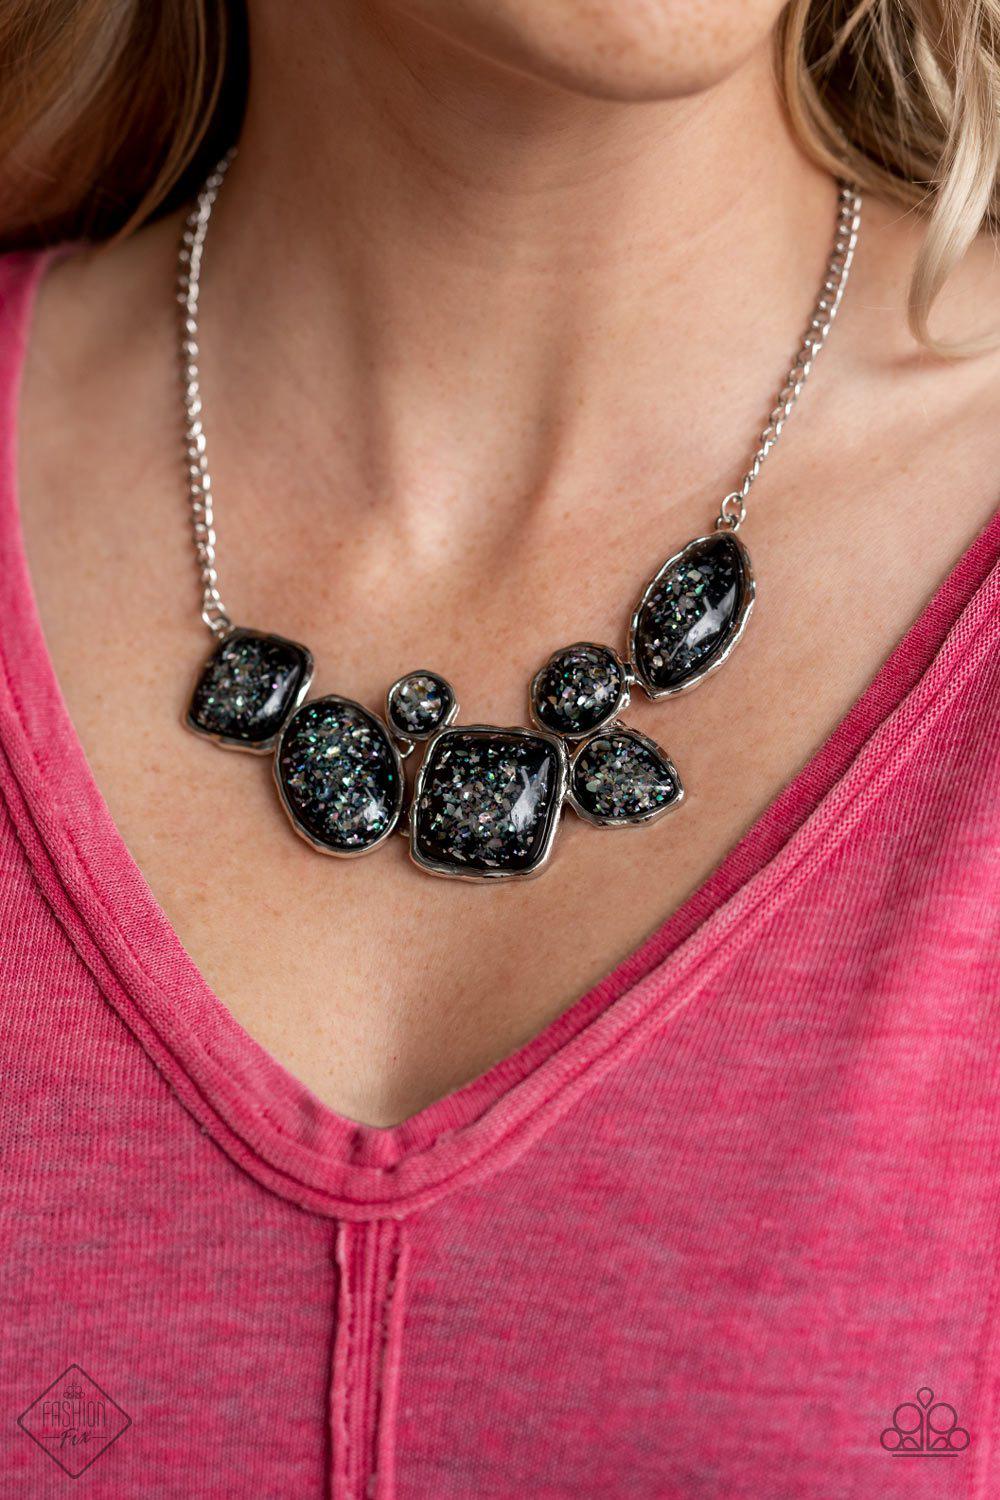 So Jelly Black and Iridescent Bead Necklace - Paparazzi Accessories- model - CarasShop.com - $5 Jewelry by Cara Jewels